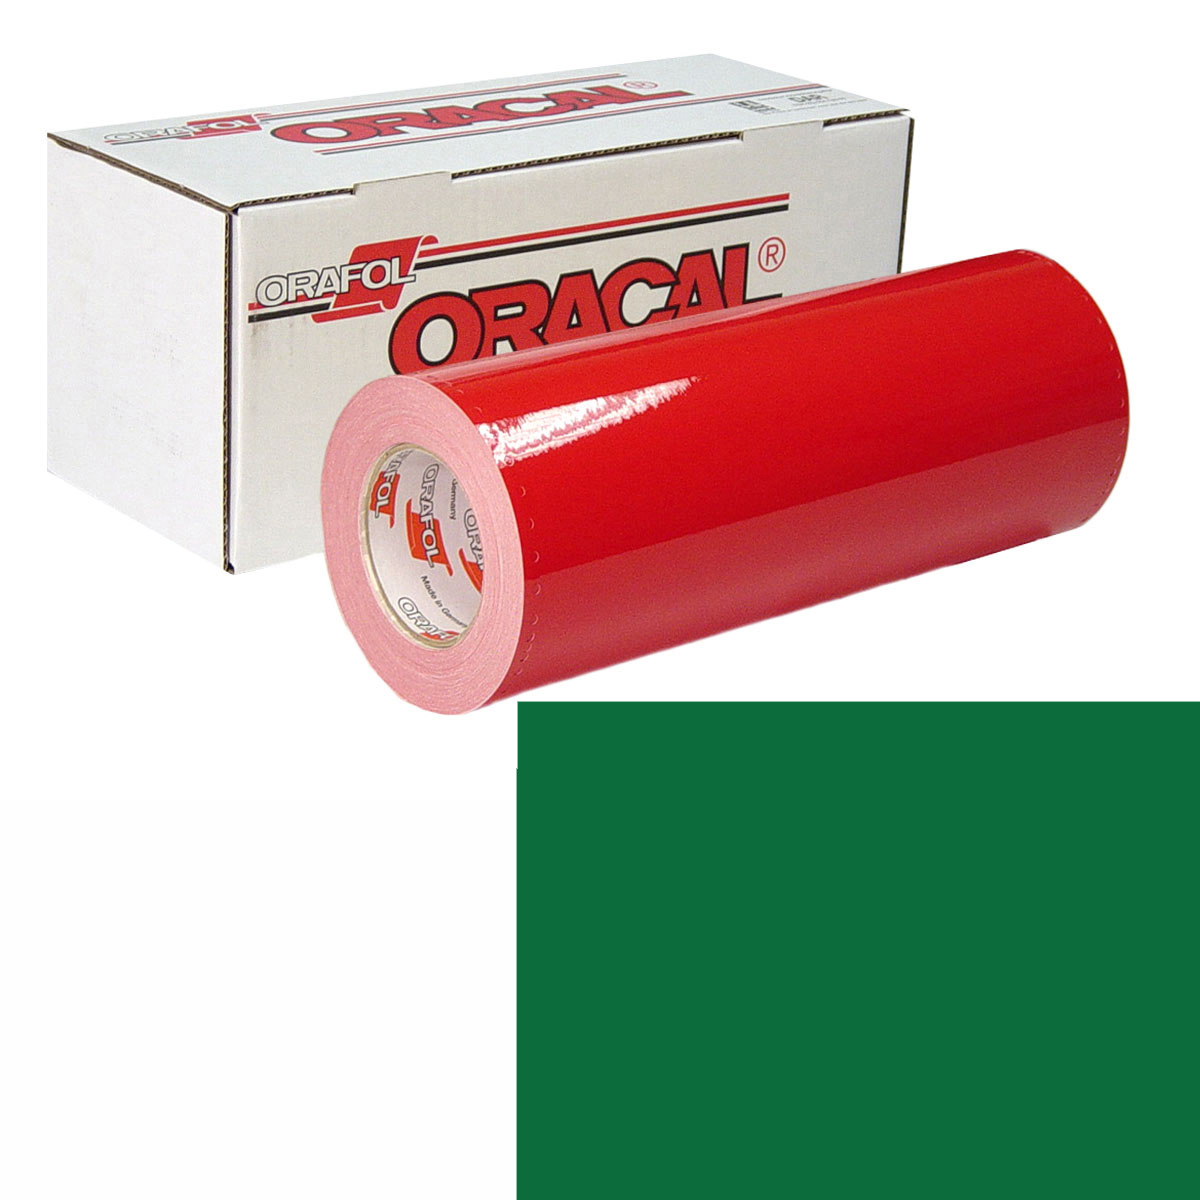 ORACAL 951 15in X 10yd 612 Police Green